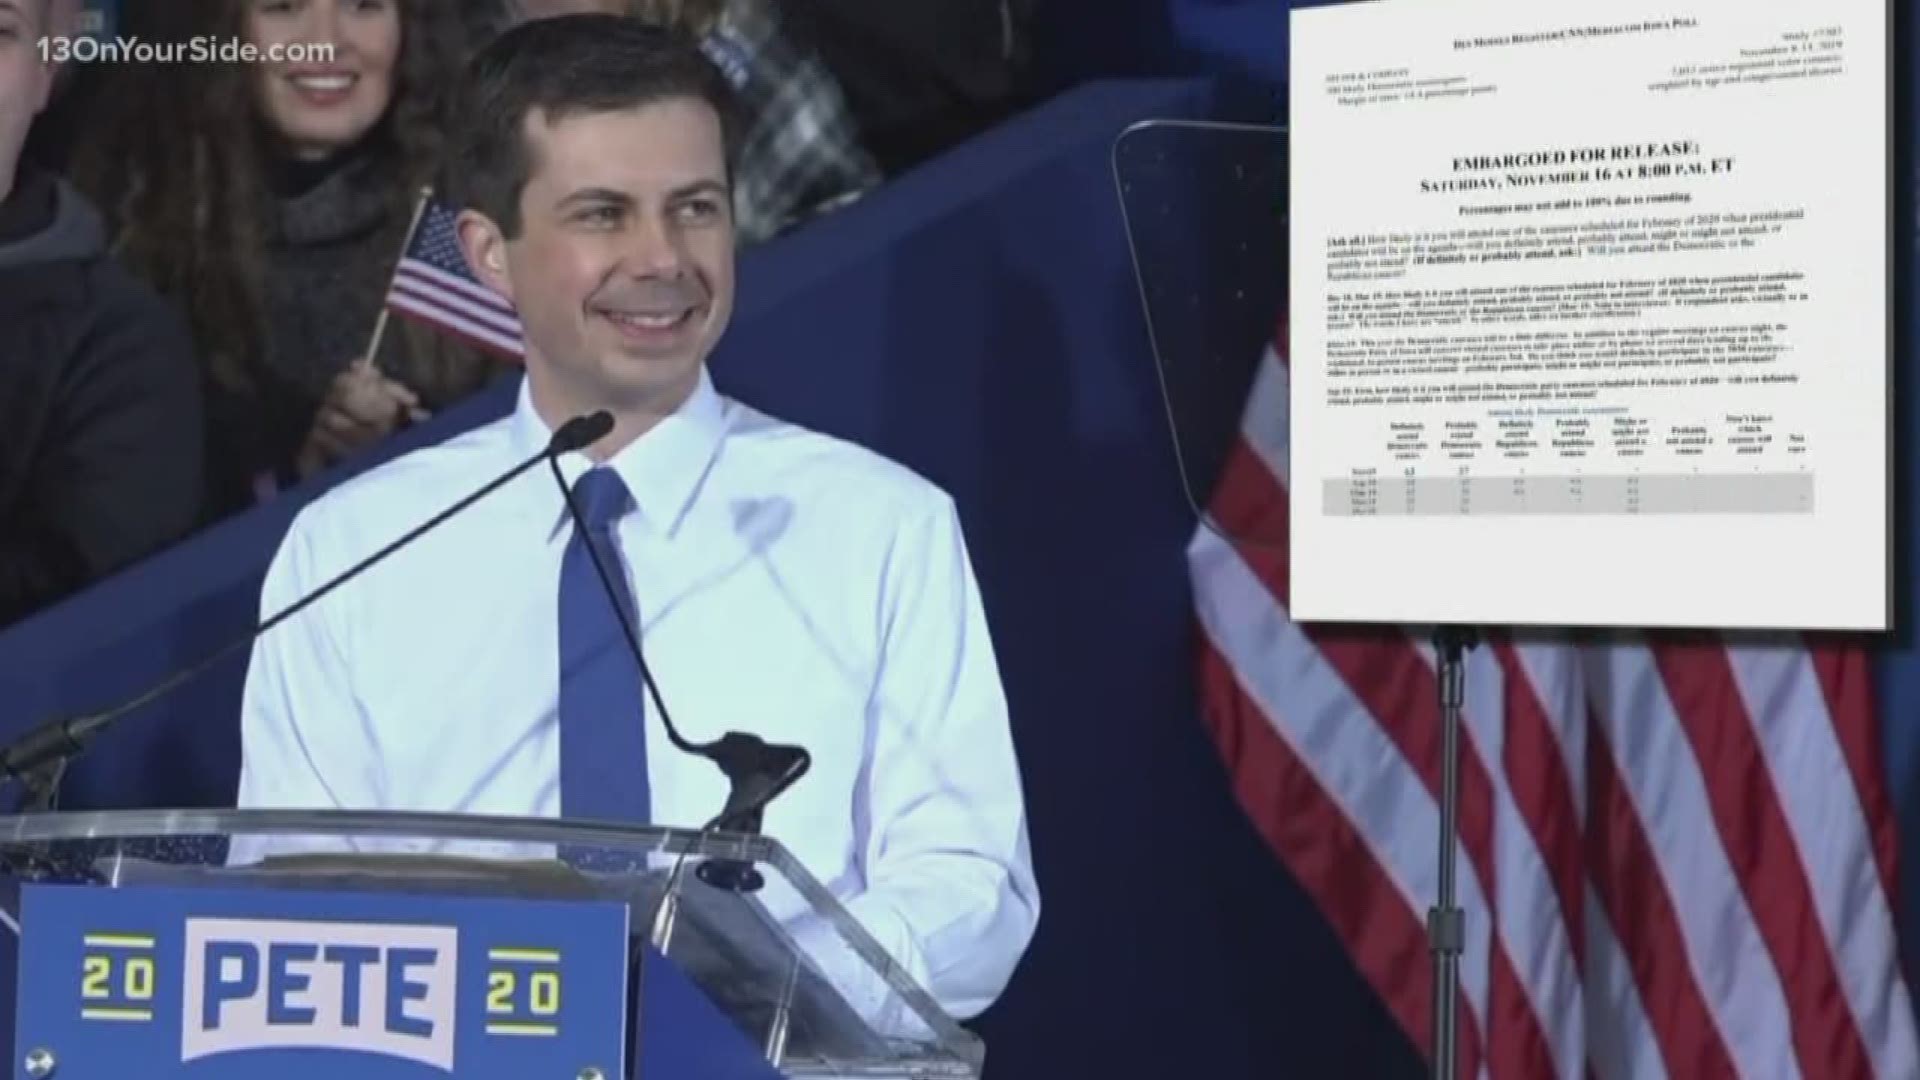 With South Bend's Mayor Pete rising in the polls, a lot of people are curious about his chances.